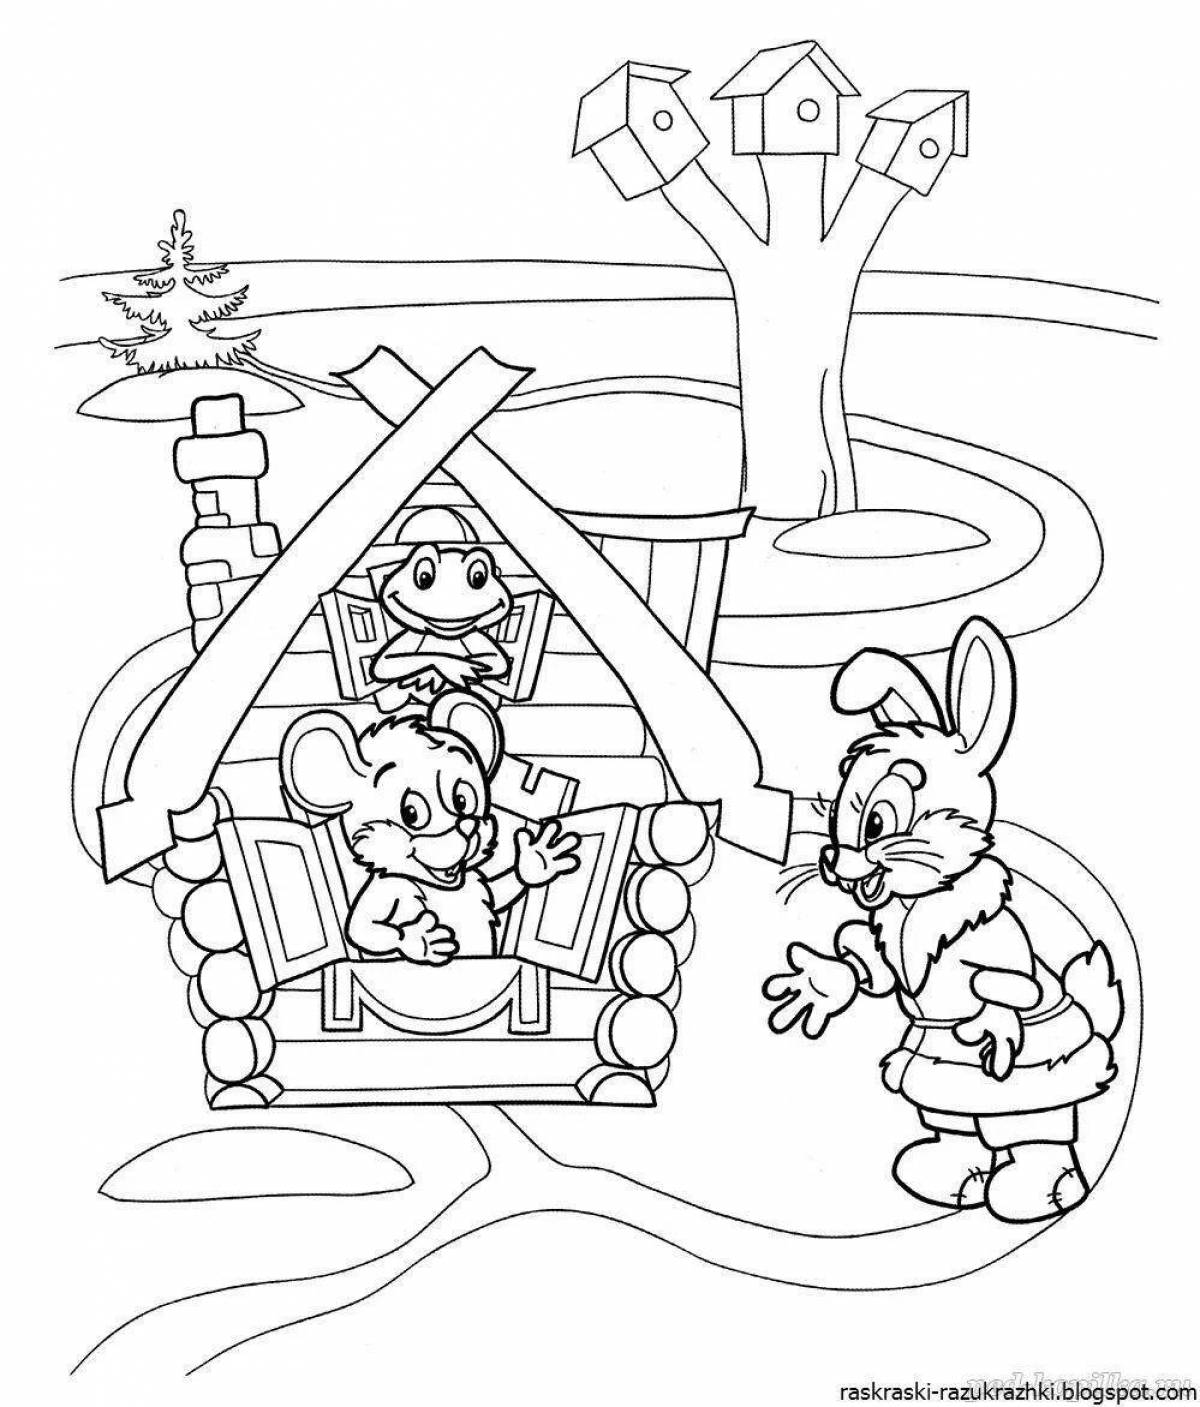 Playful coloring book for kids 6-7 years old